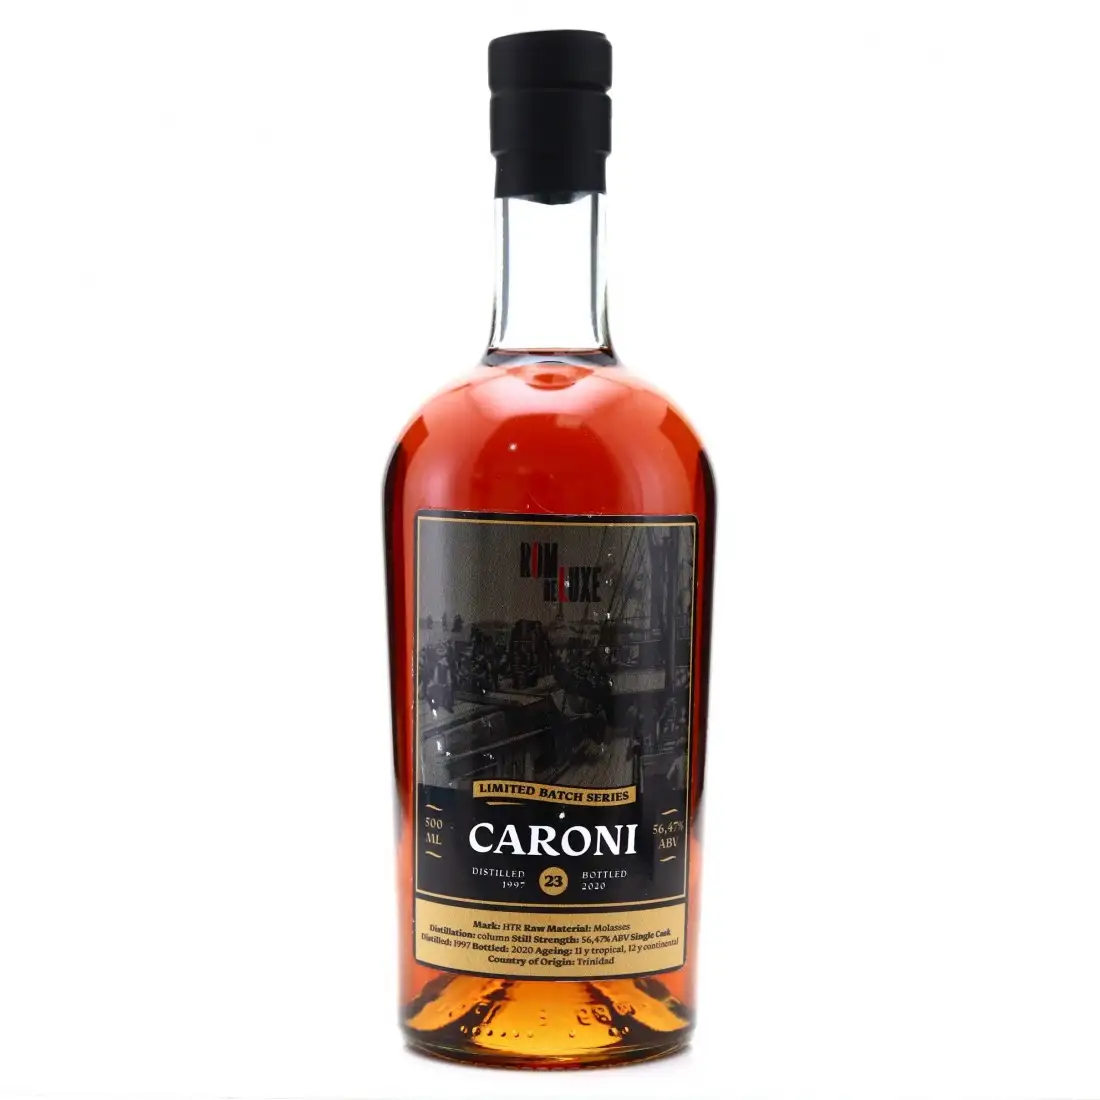 Image of the front of the bottle of the rum Limited Batch Series